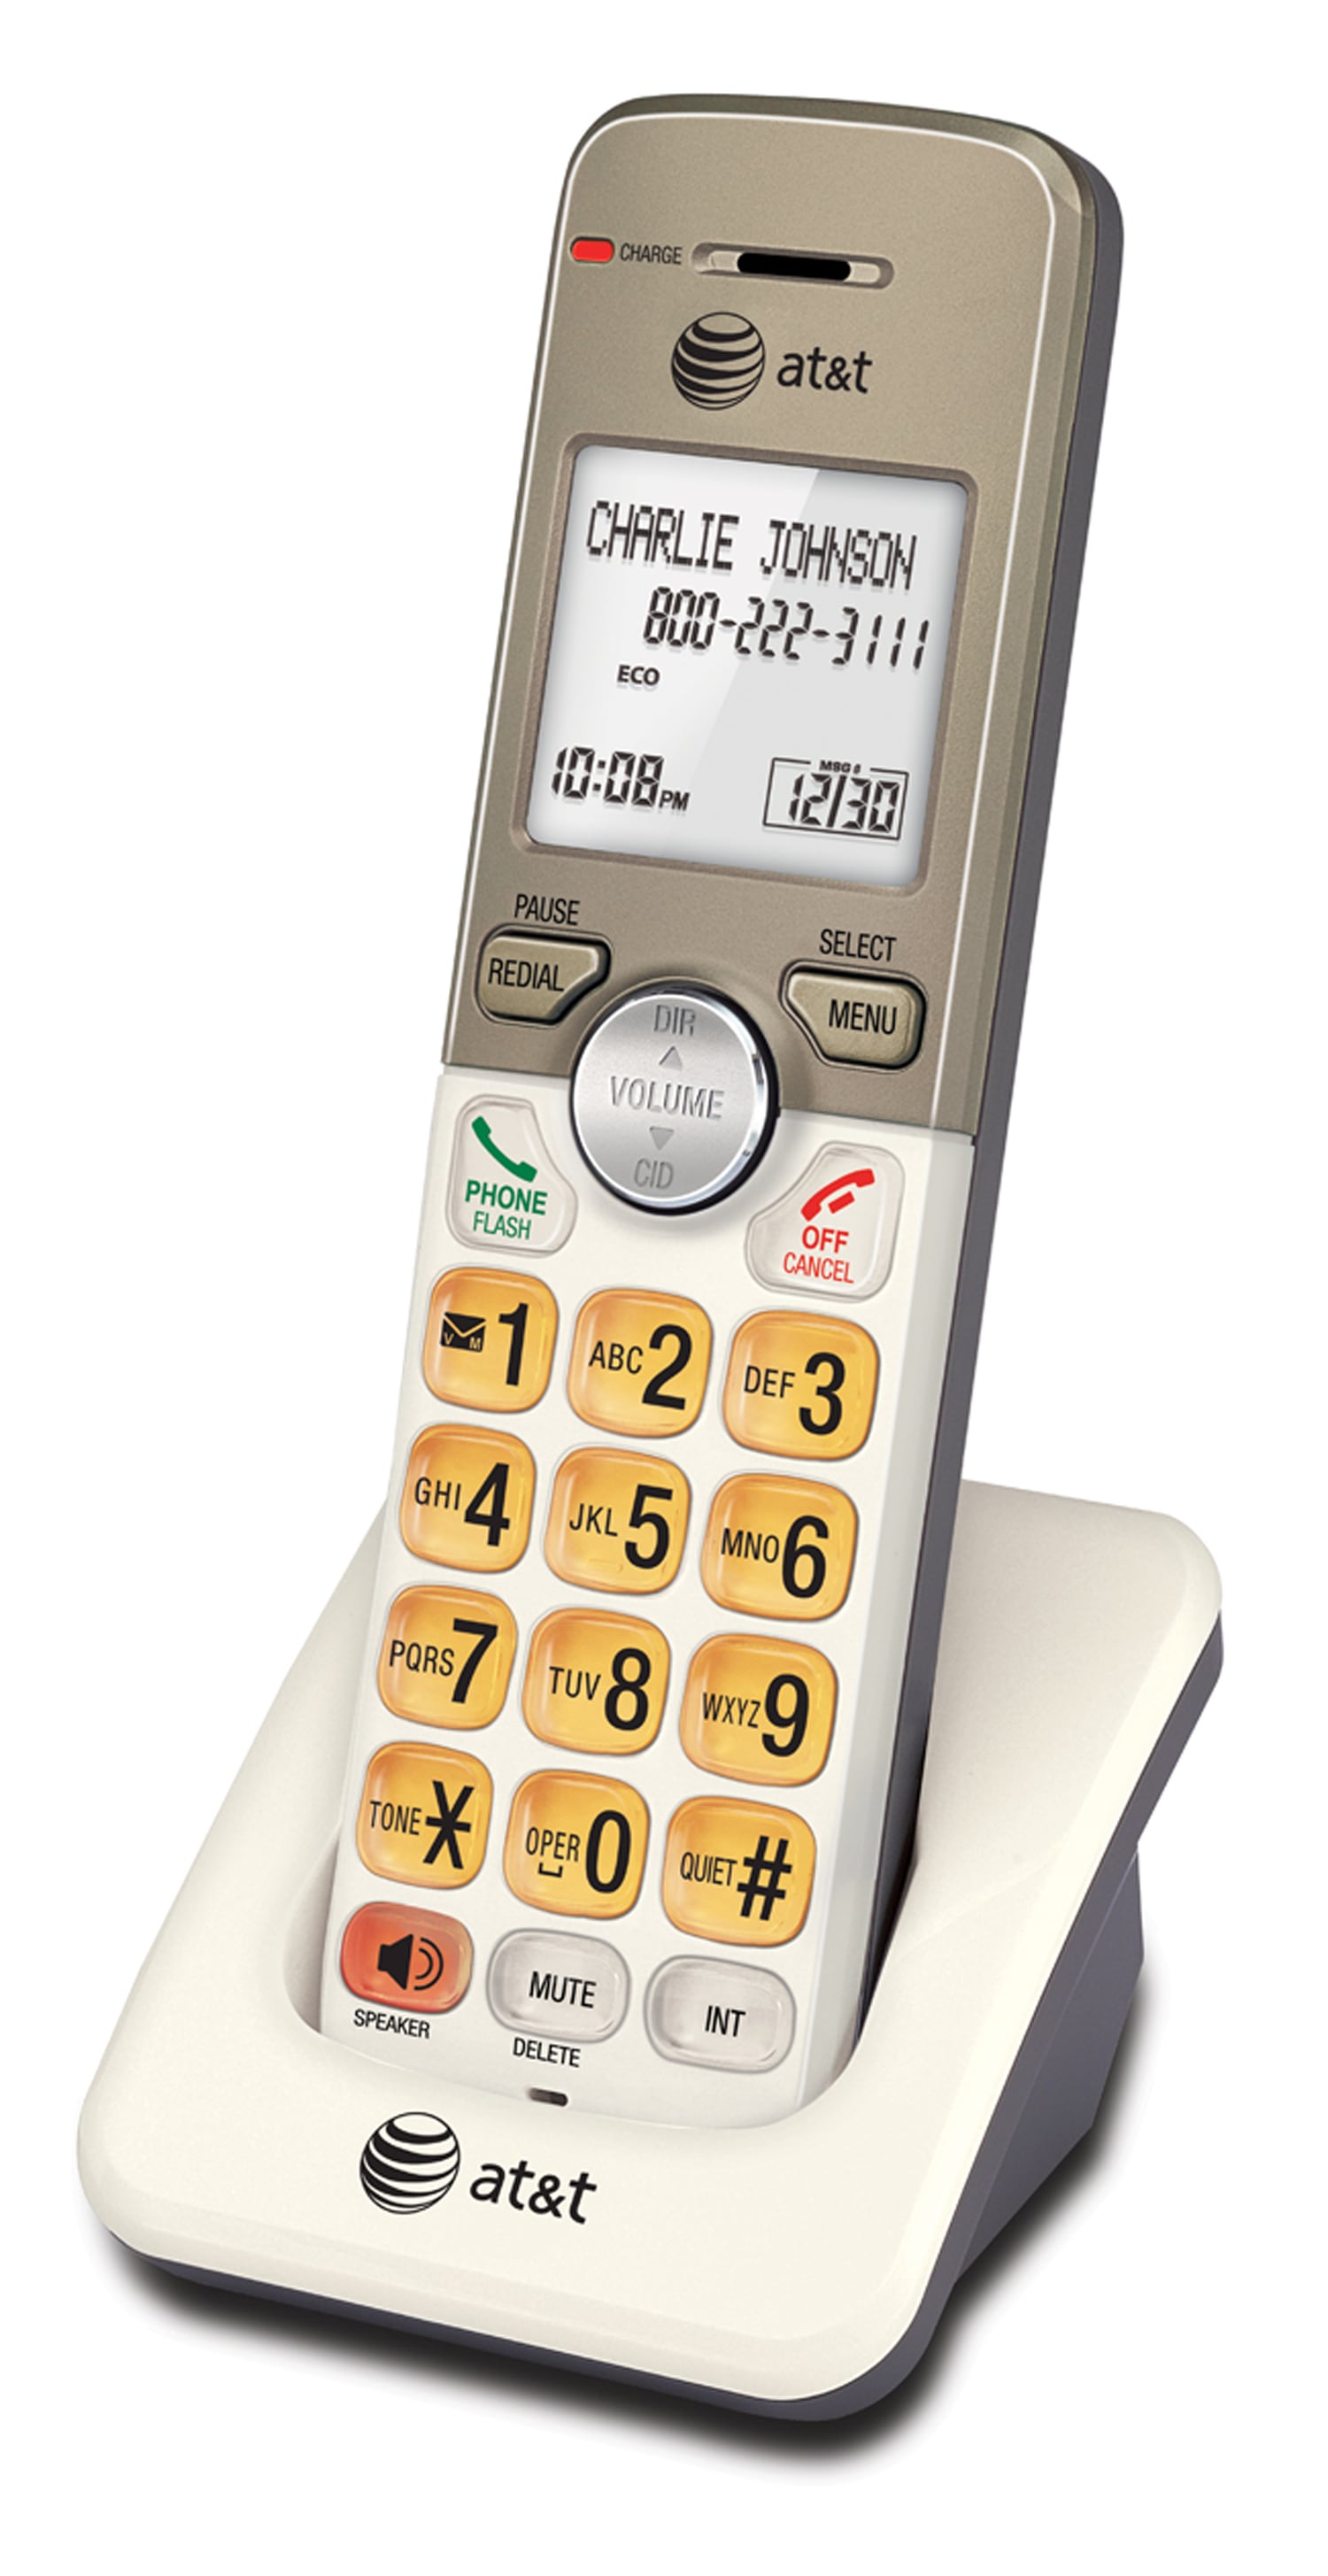 Cordless phone system with caller ID/call waiting - view 4